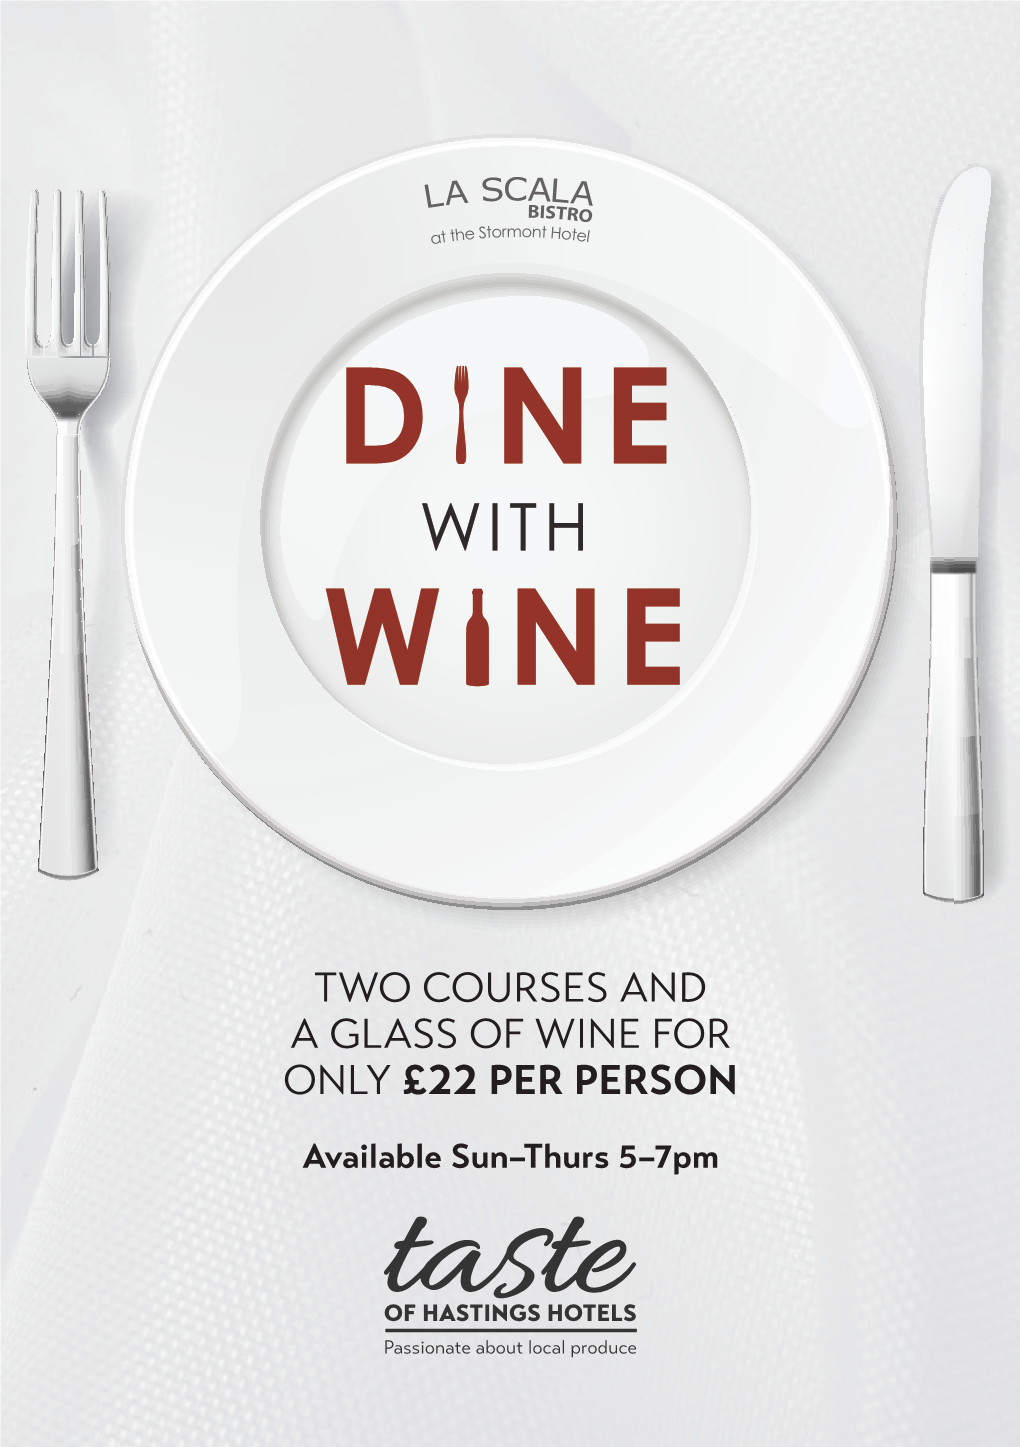 Dine with Wine Offer May Not Be Used Causeway Chips in Conjunction with Any Other Promotion